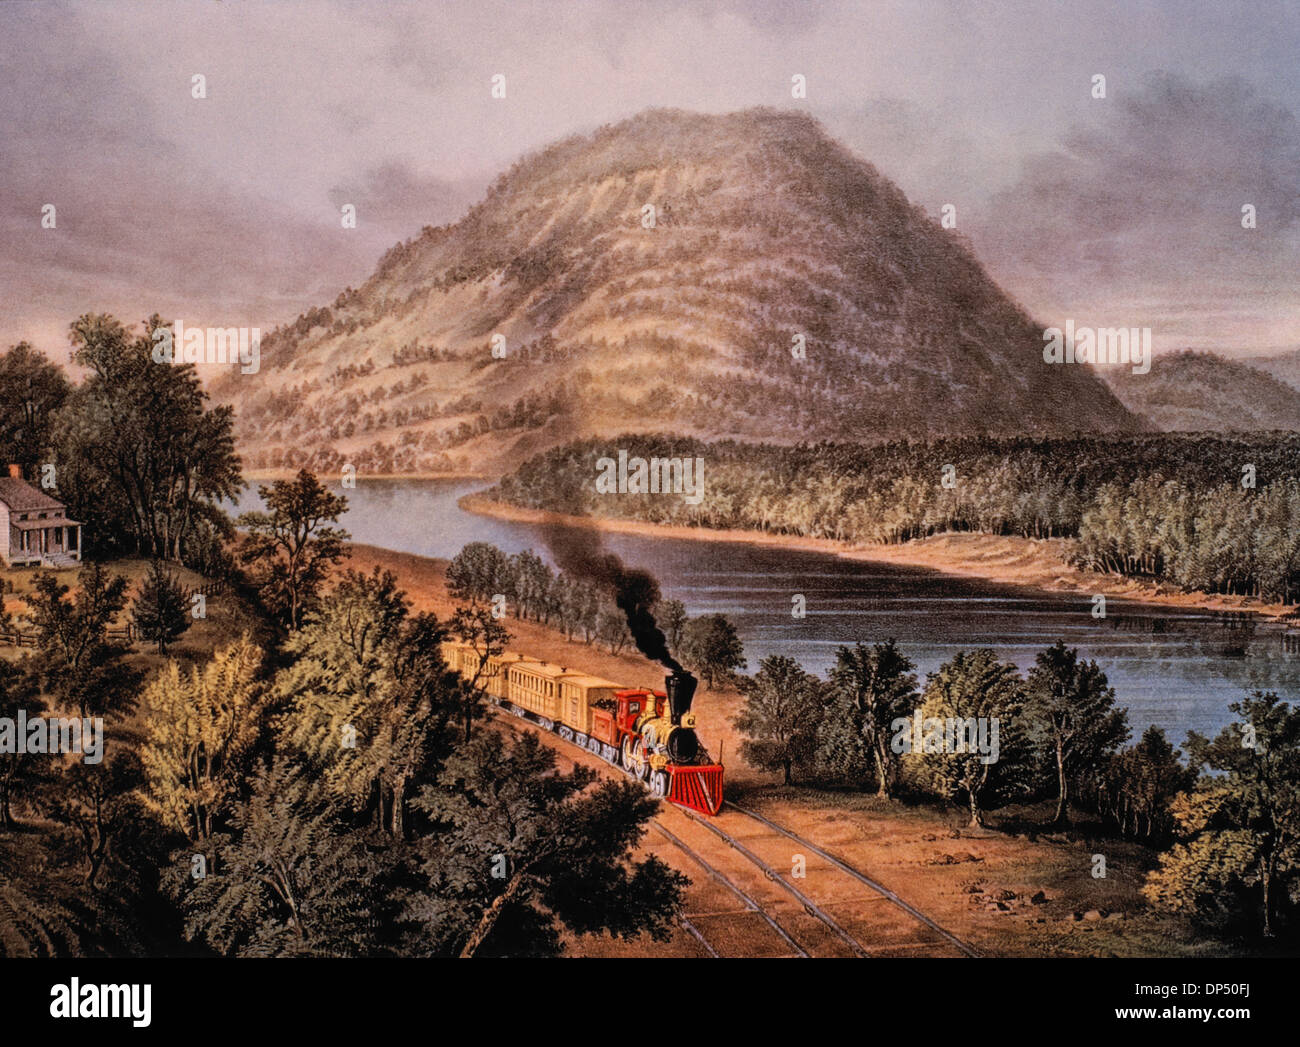 https://c8.alamy.com/comp/DP50FJ/lookout-mountain-tennessee-and-chattanooga-railroad-lithograph-currier-DP50FJ.jpg